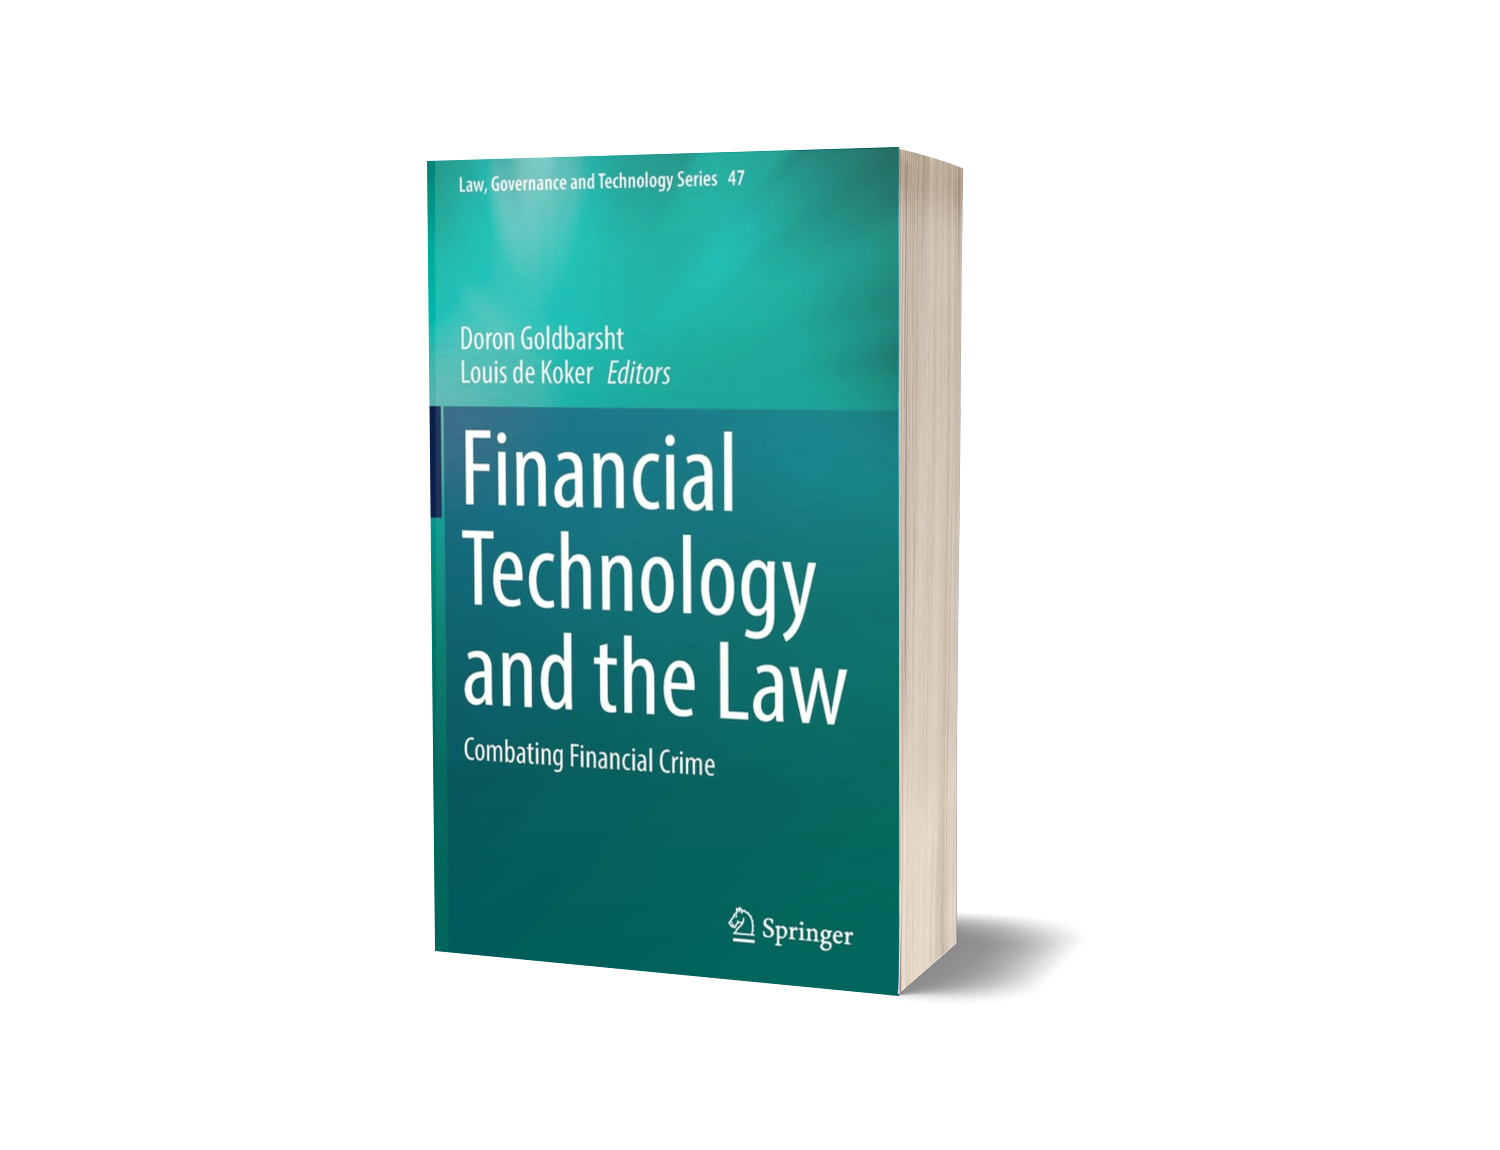 De Koker, Louis and Doron Goldbarsht (eds.) Financial Technology and the Law: Combating Financial Crime (2022) Springer, 328pp.